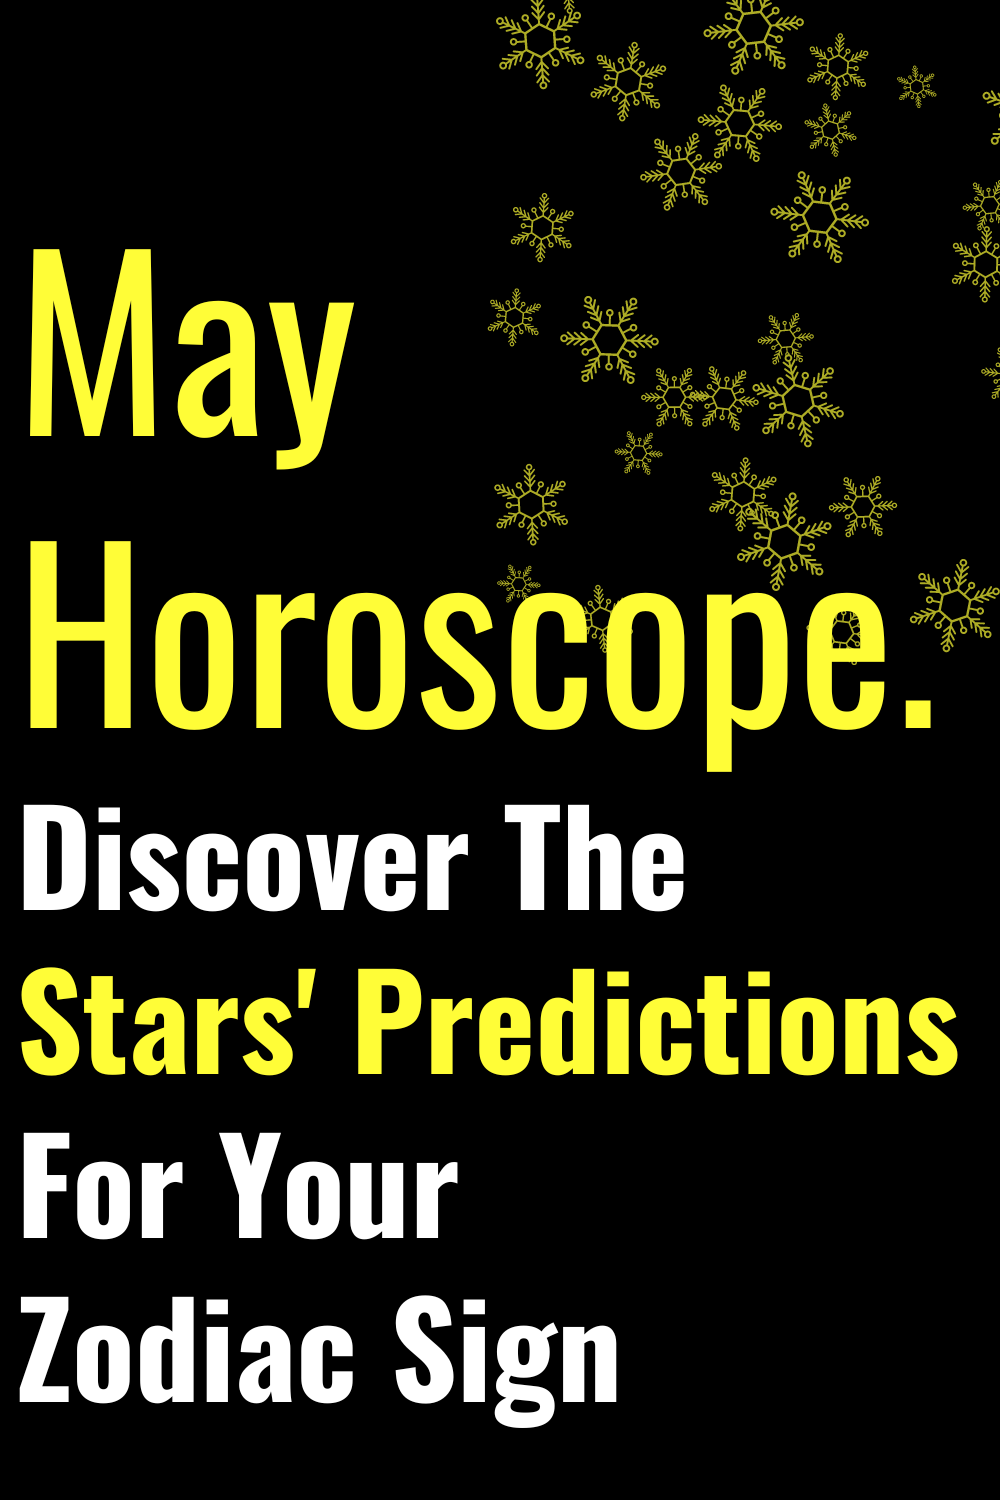 May Horoscope. Discover The Stars' Predictions For Your Zodiac Sign